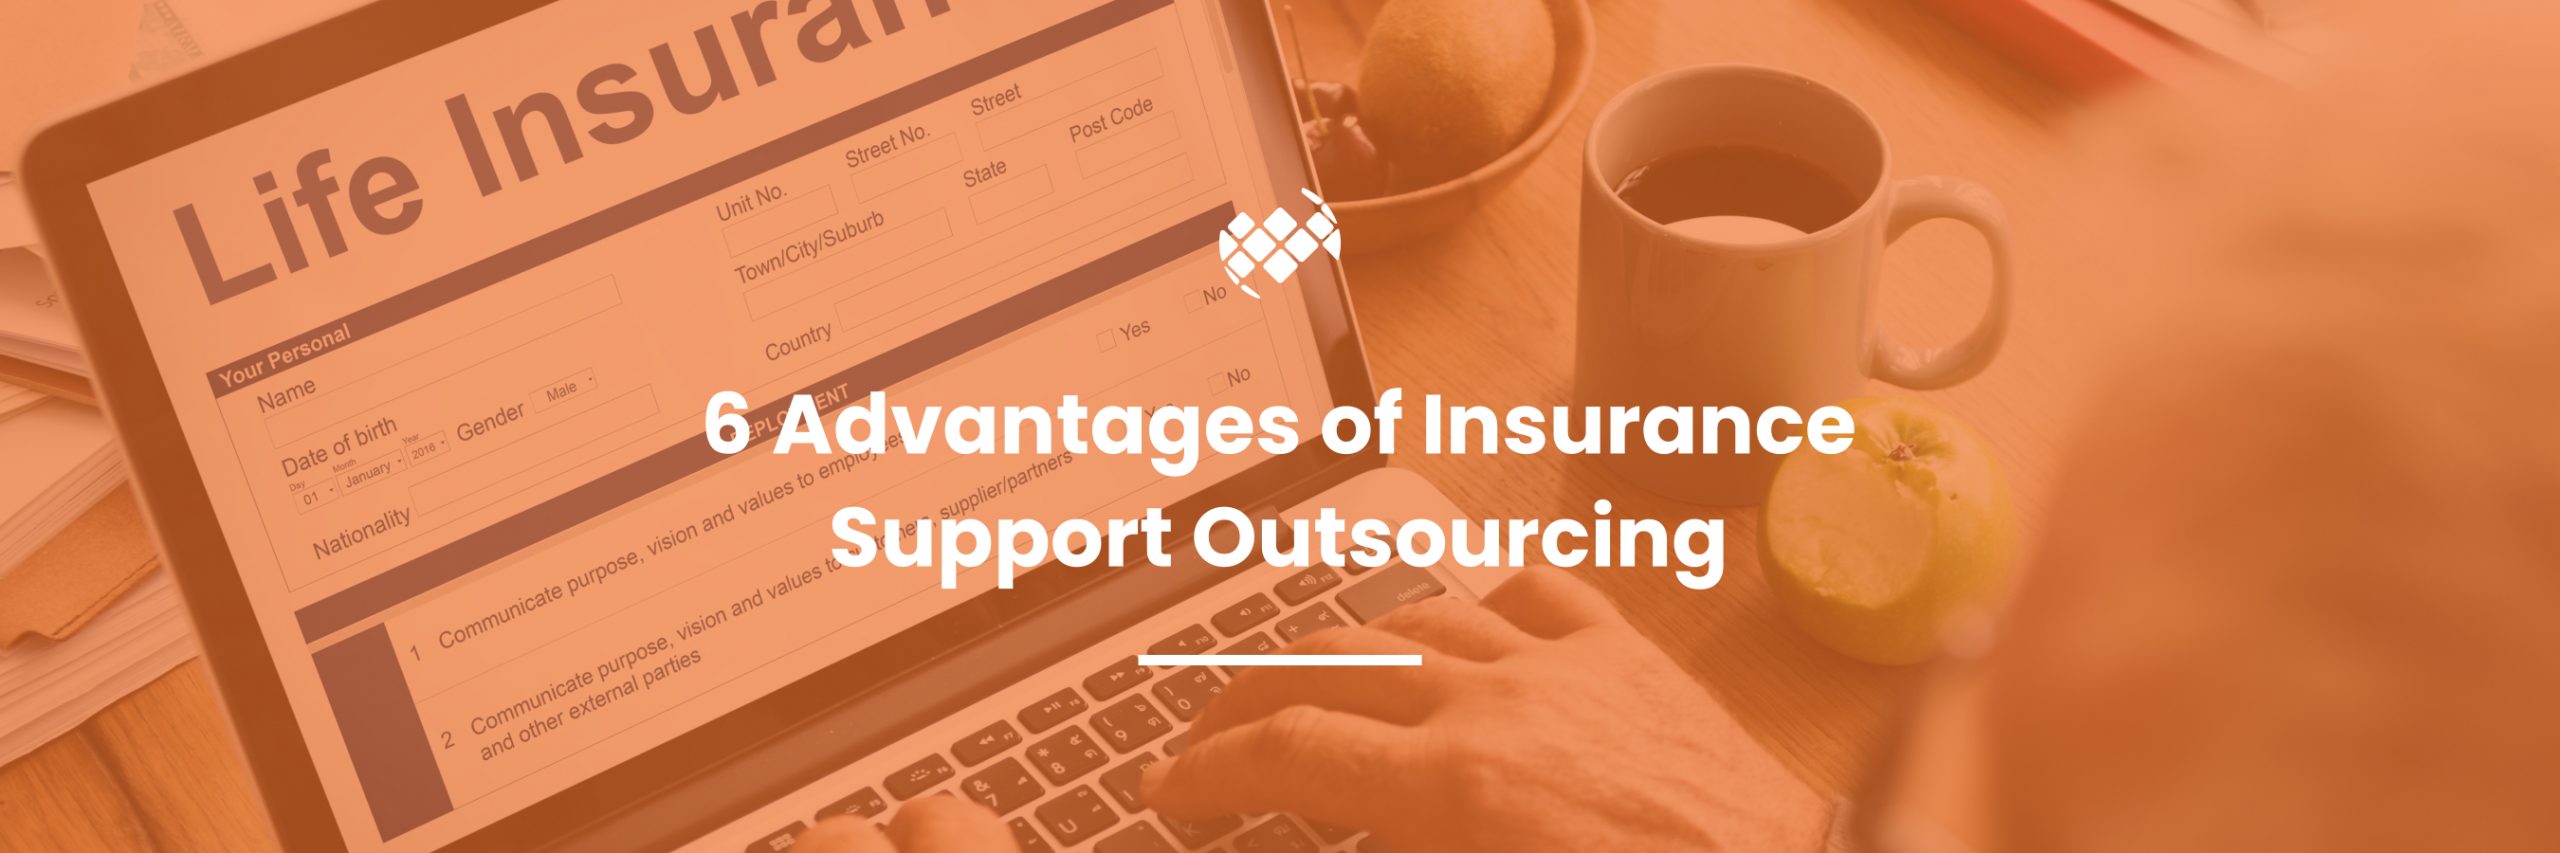 Insurance support outsourcing